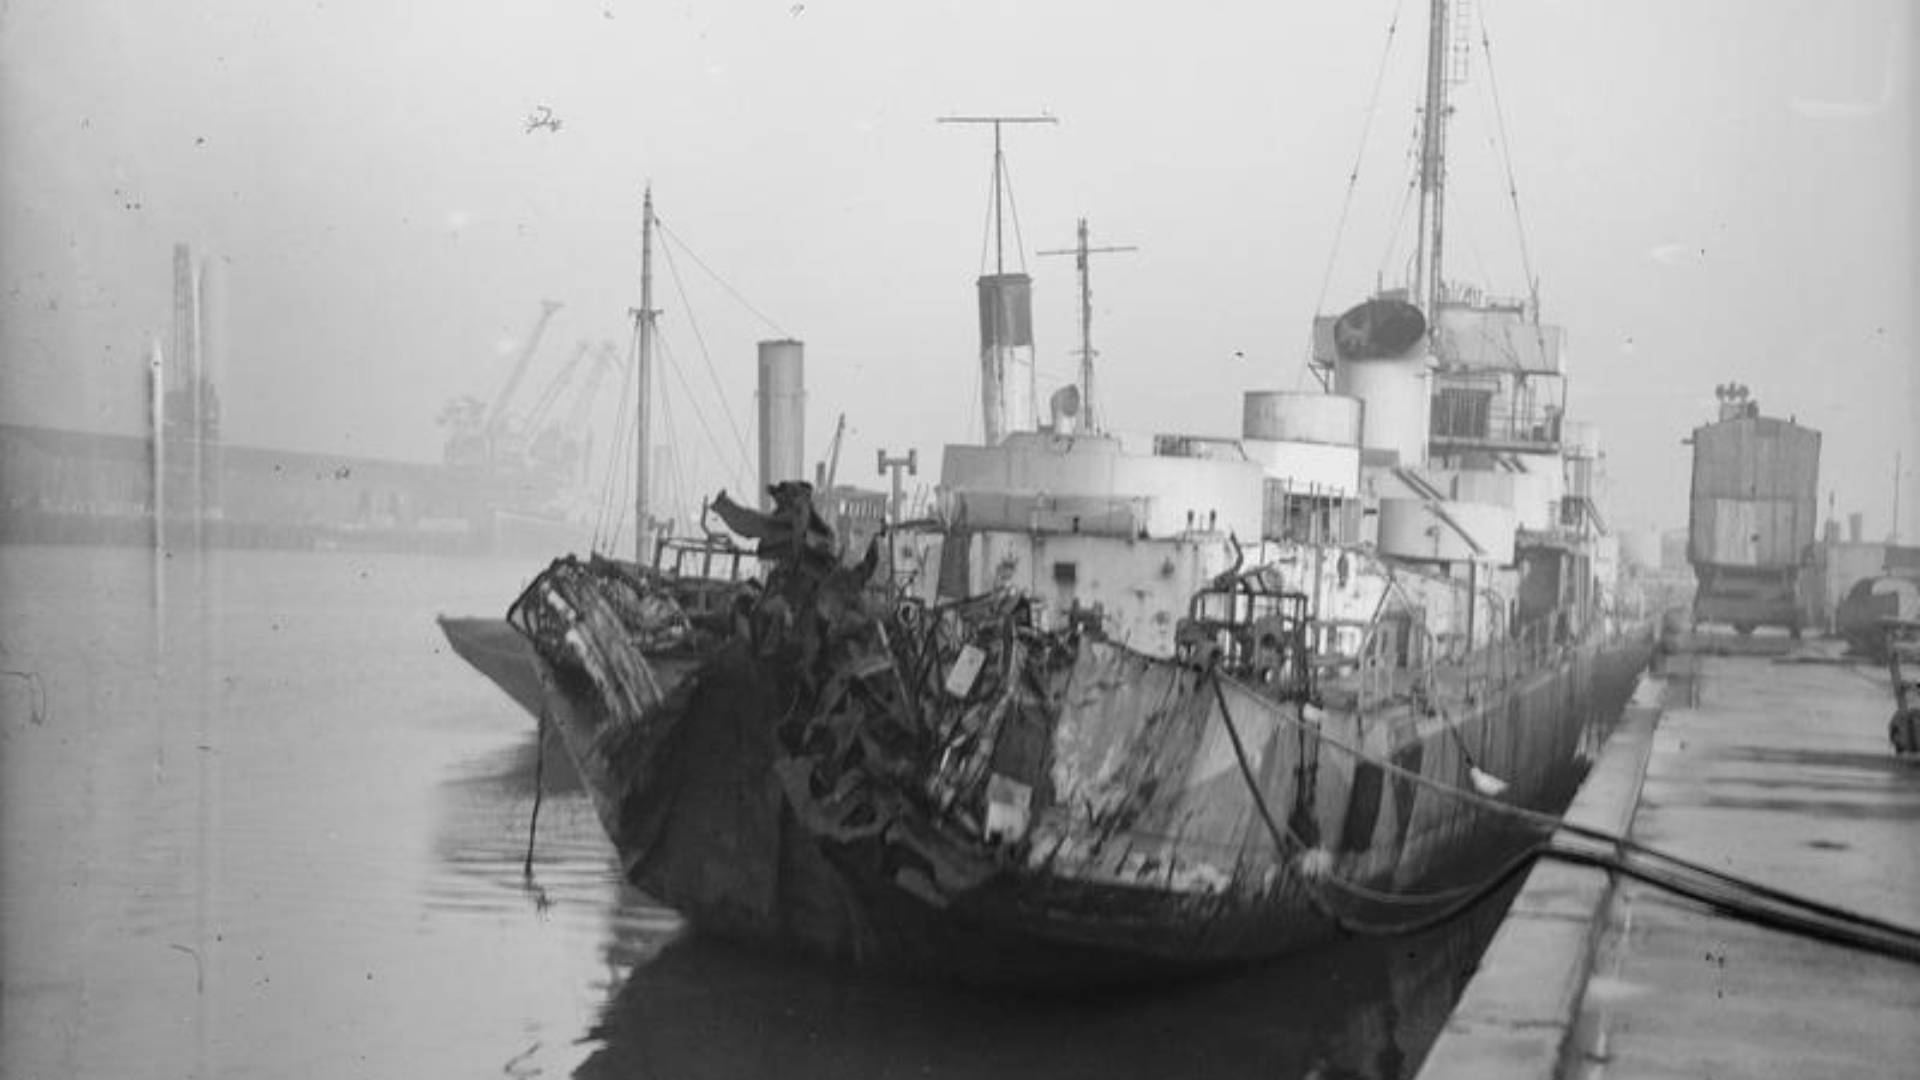 A Royal Navy Frigate with damaged stern docked in Pollock Dock, Belfast on 27th December 1942